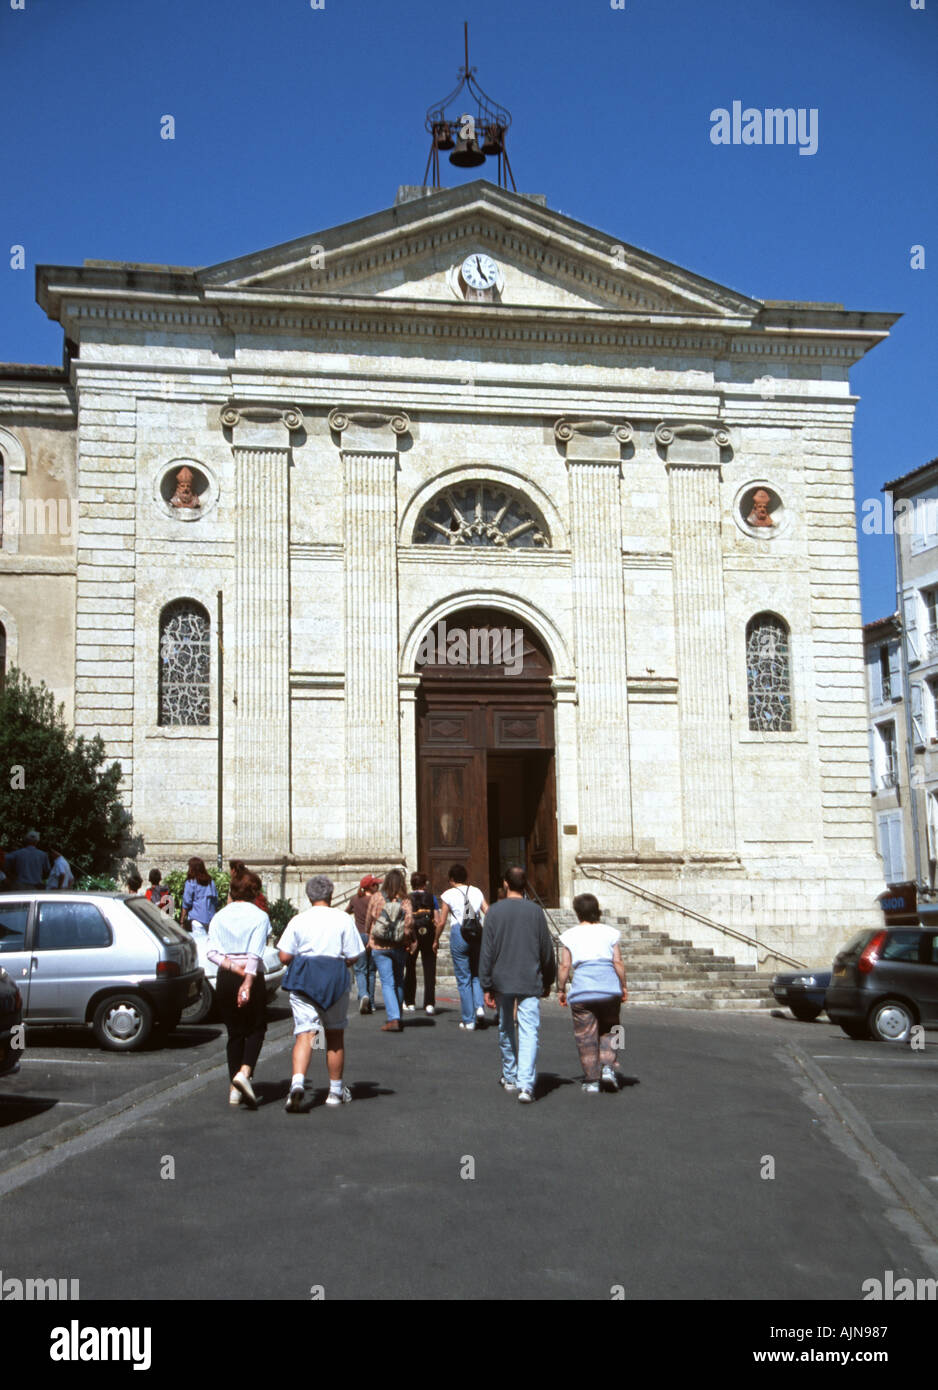 The facade of the 19th century Eglise Saint Orens at Auch Stock Photo